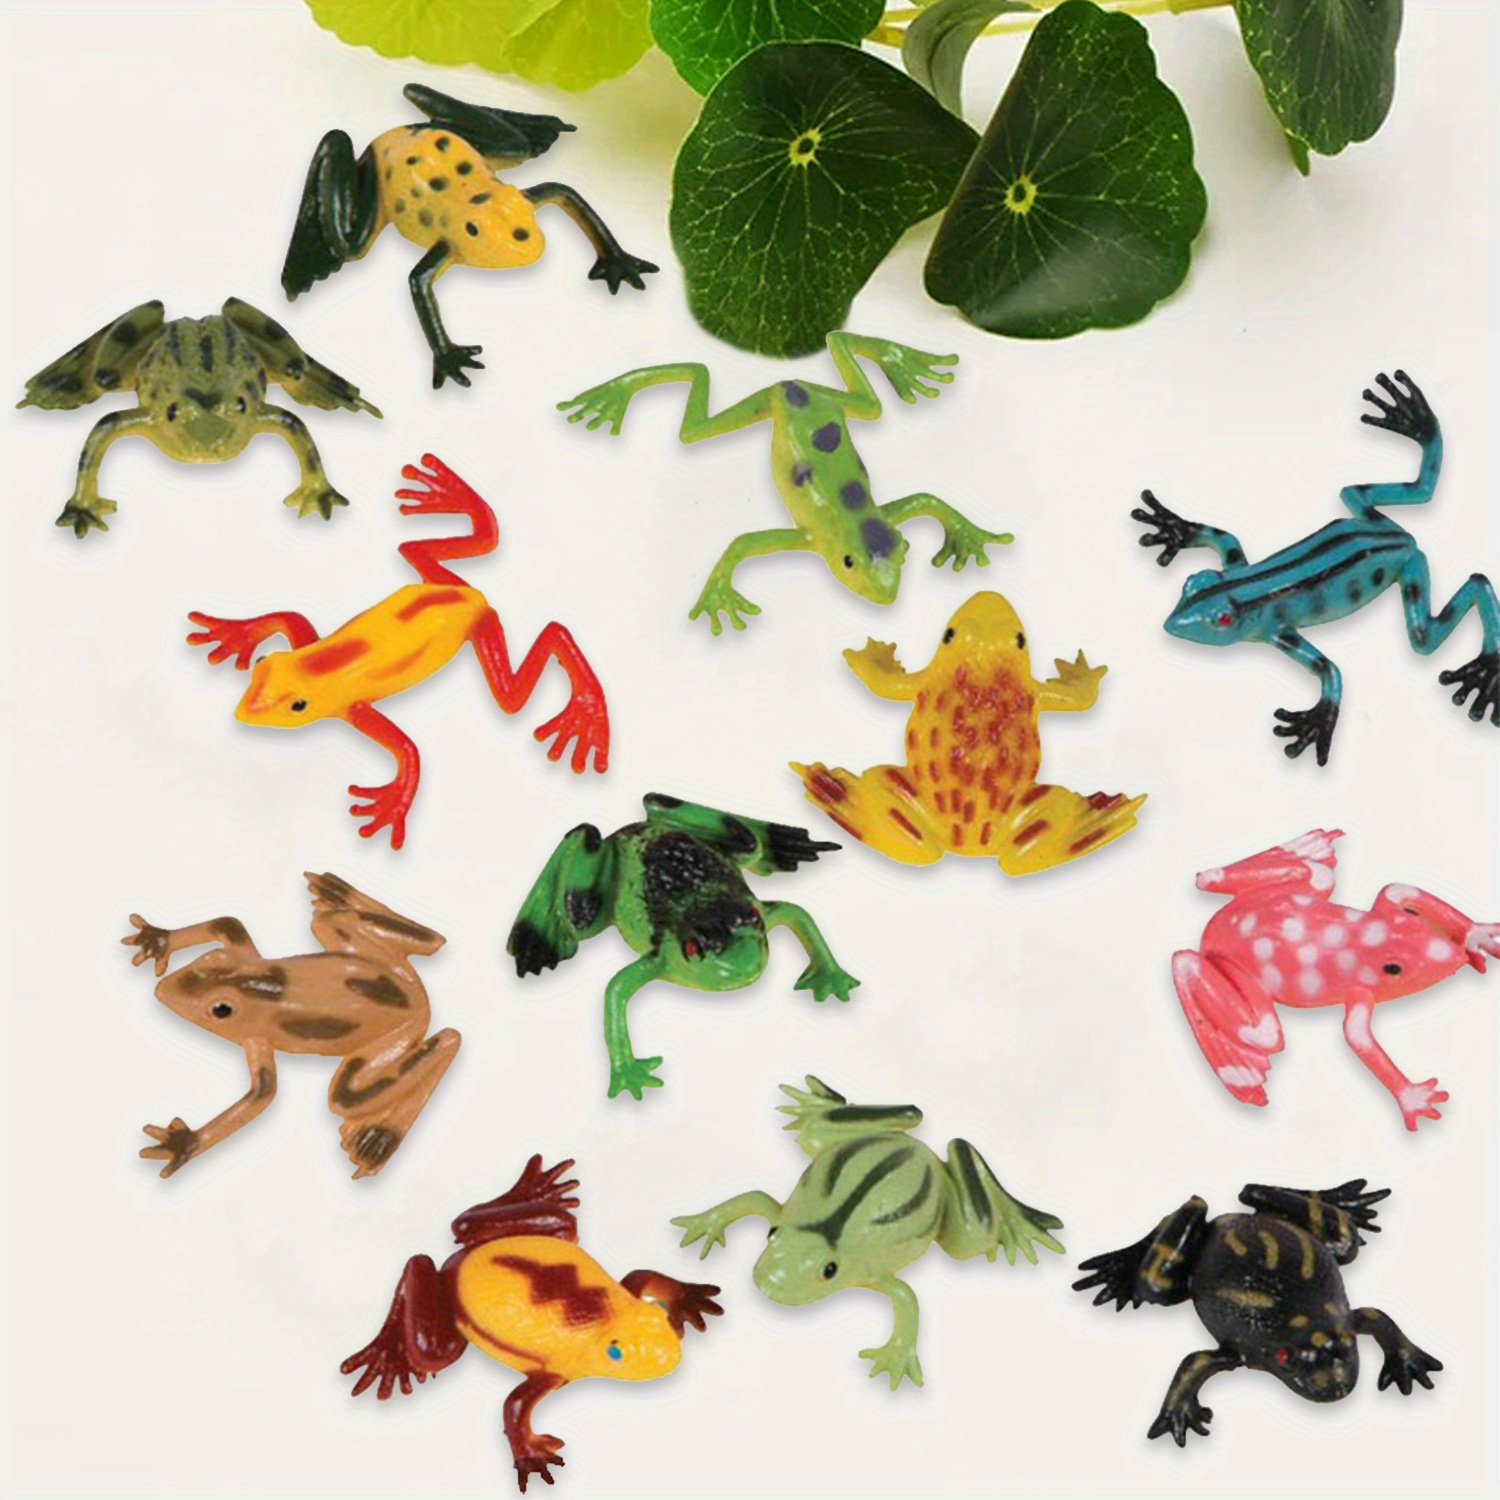 10Pcs Spoof Simulation Soft Rubber Frog Model Animal Toys Toad Tricky Scary  Squeeze Frog Toys Children's Gifts - AliExpress